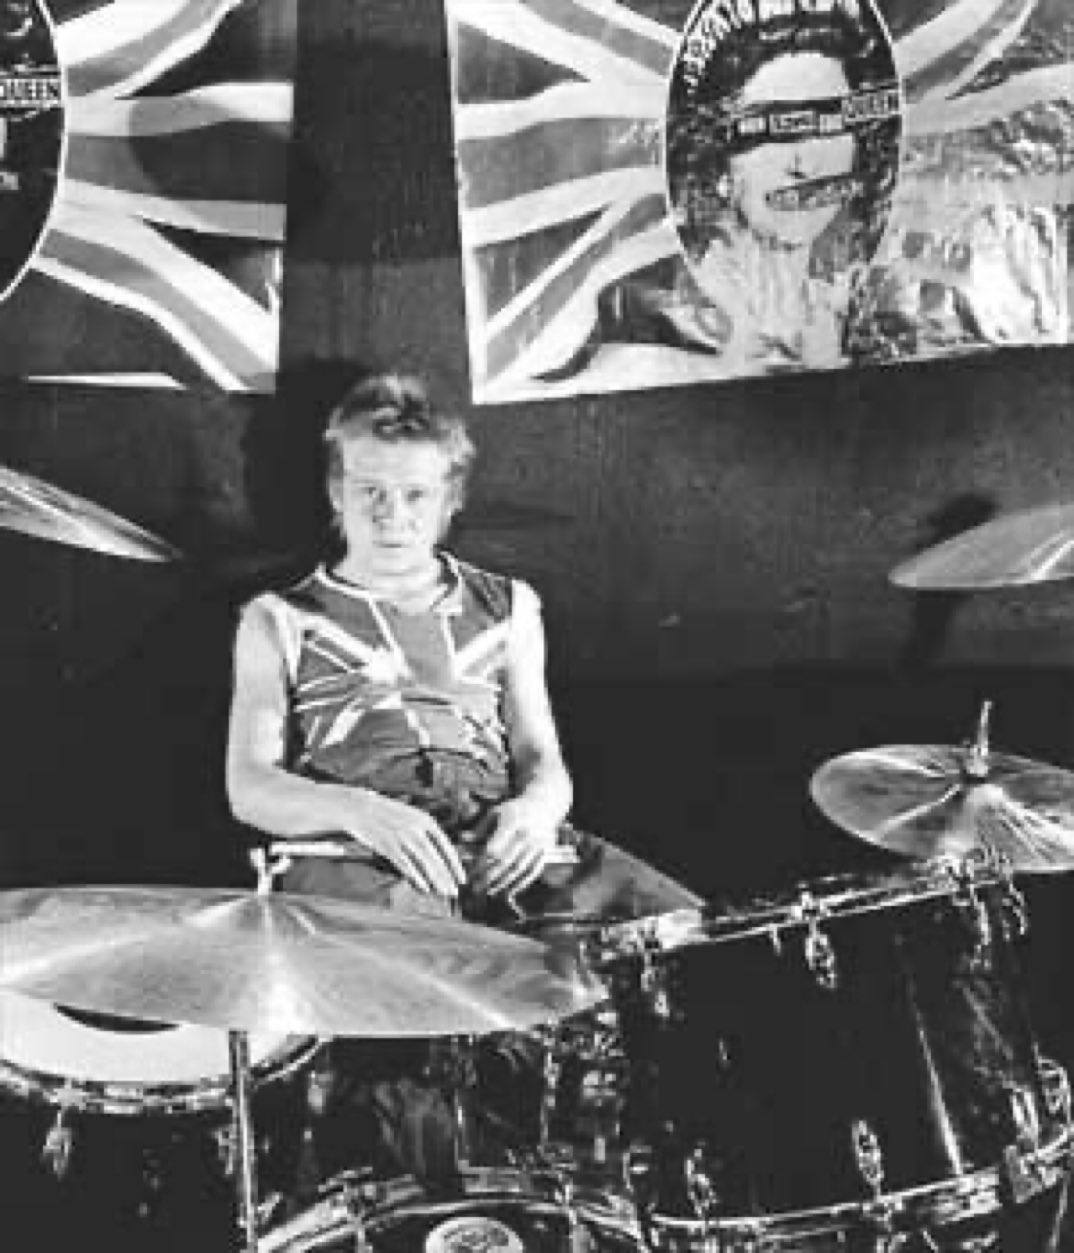 Happy 66th birthday to Sex Pistols drummer Paul Cook, who was born on this day in 1956. 